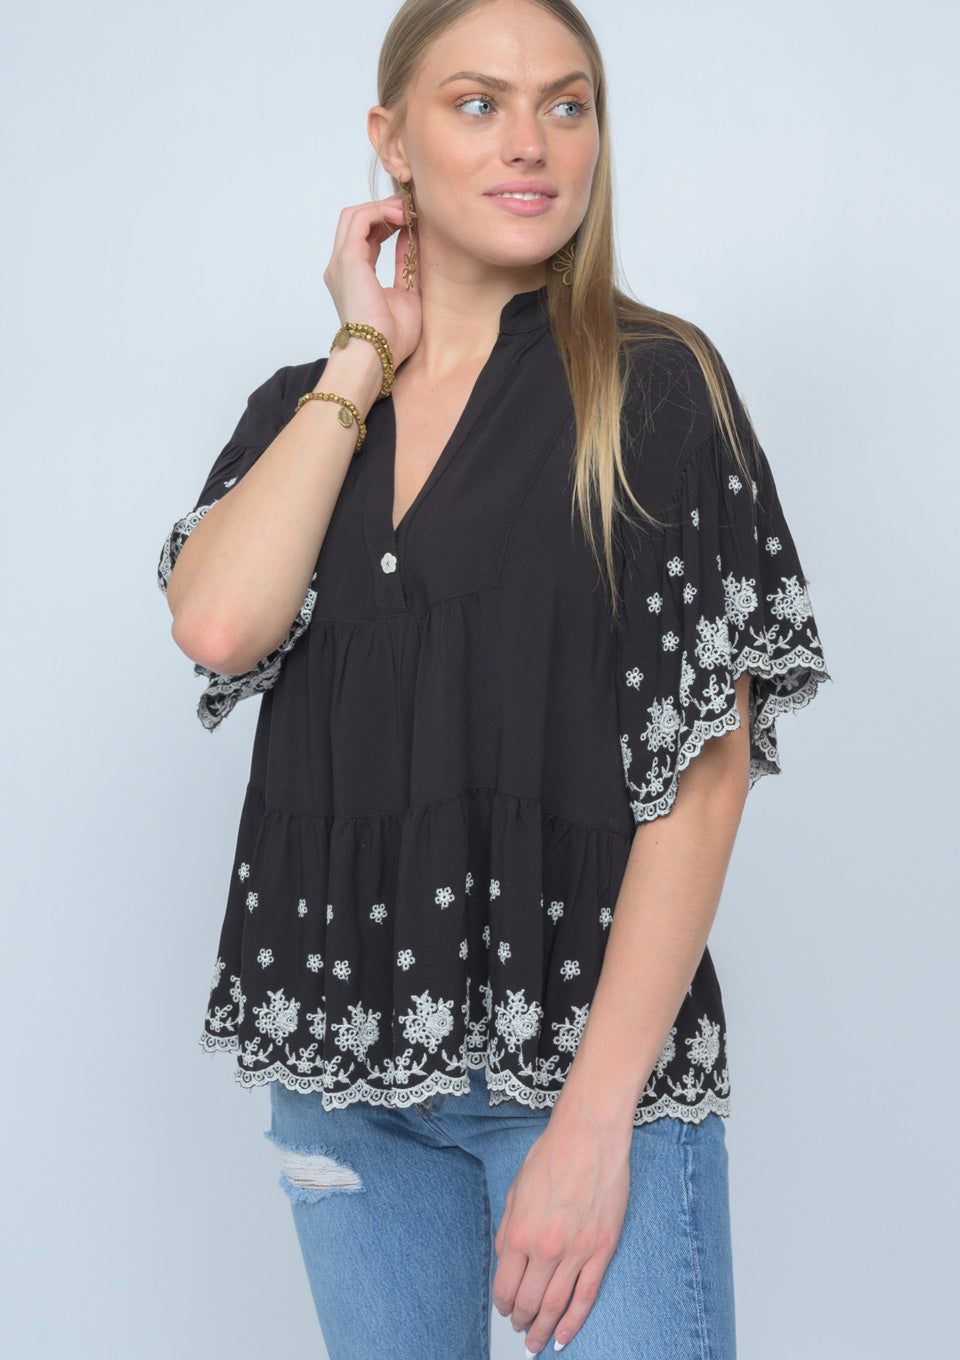 Black short bell sleeve top with white embroidery by ivy jane at 6Whiskey six whisky for women spring 2021